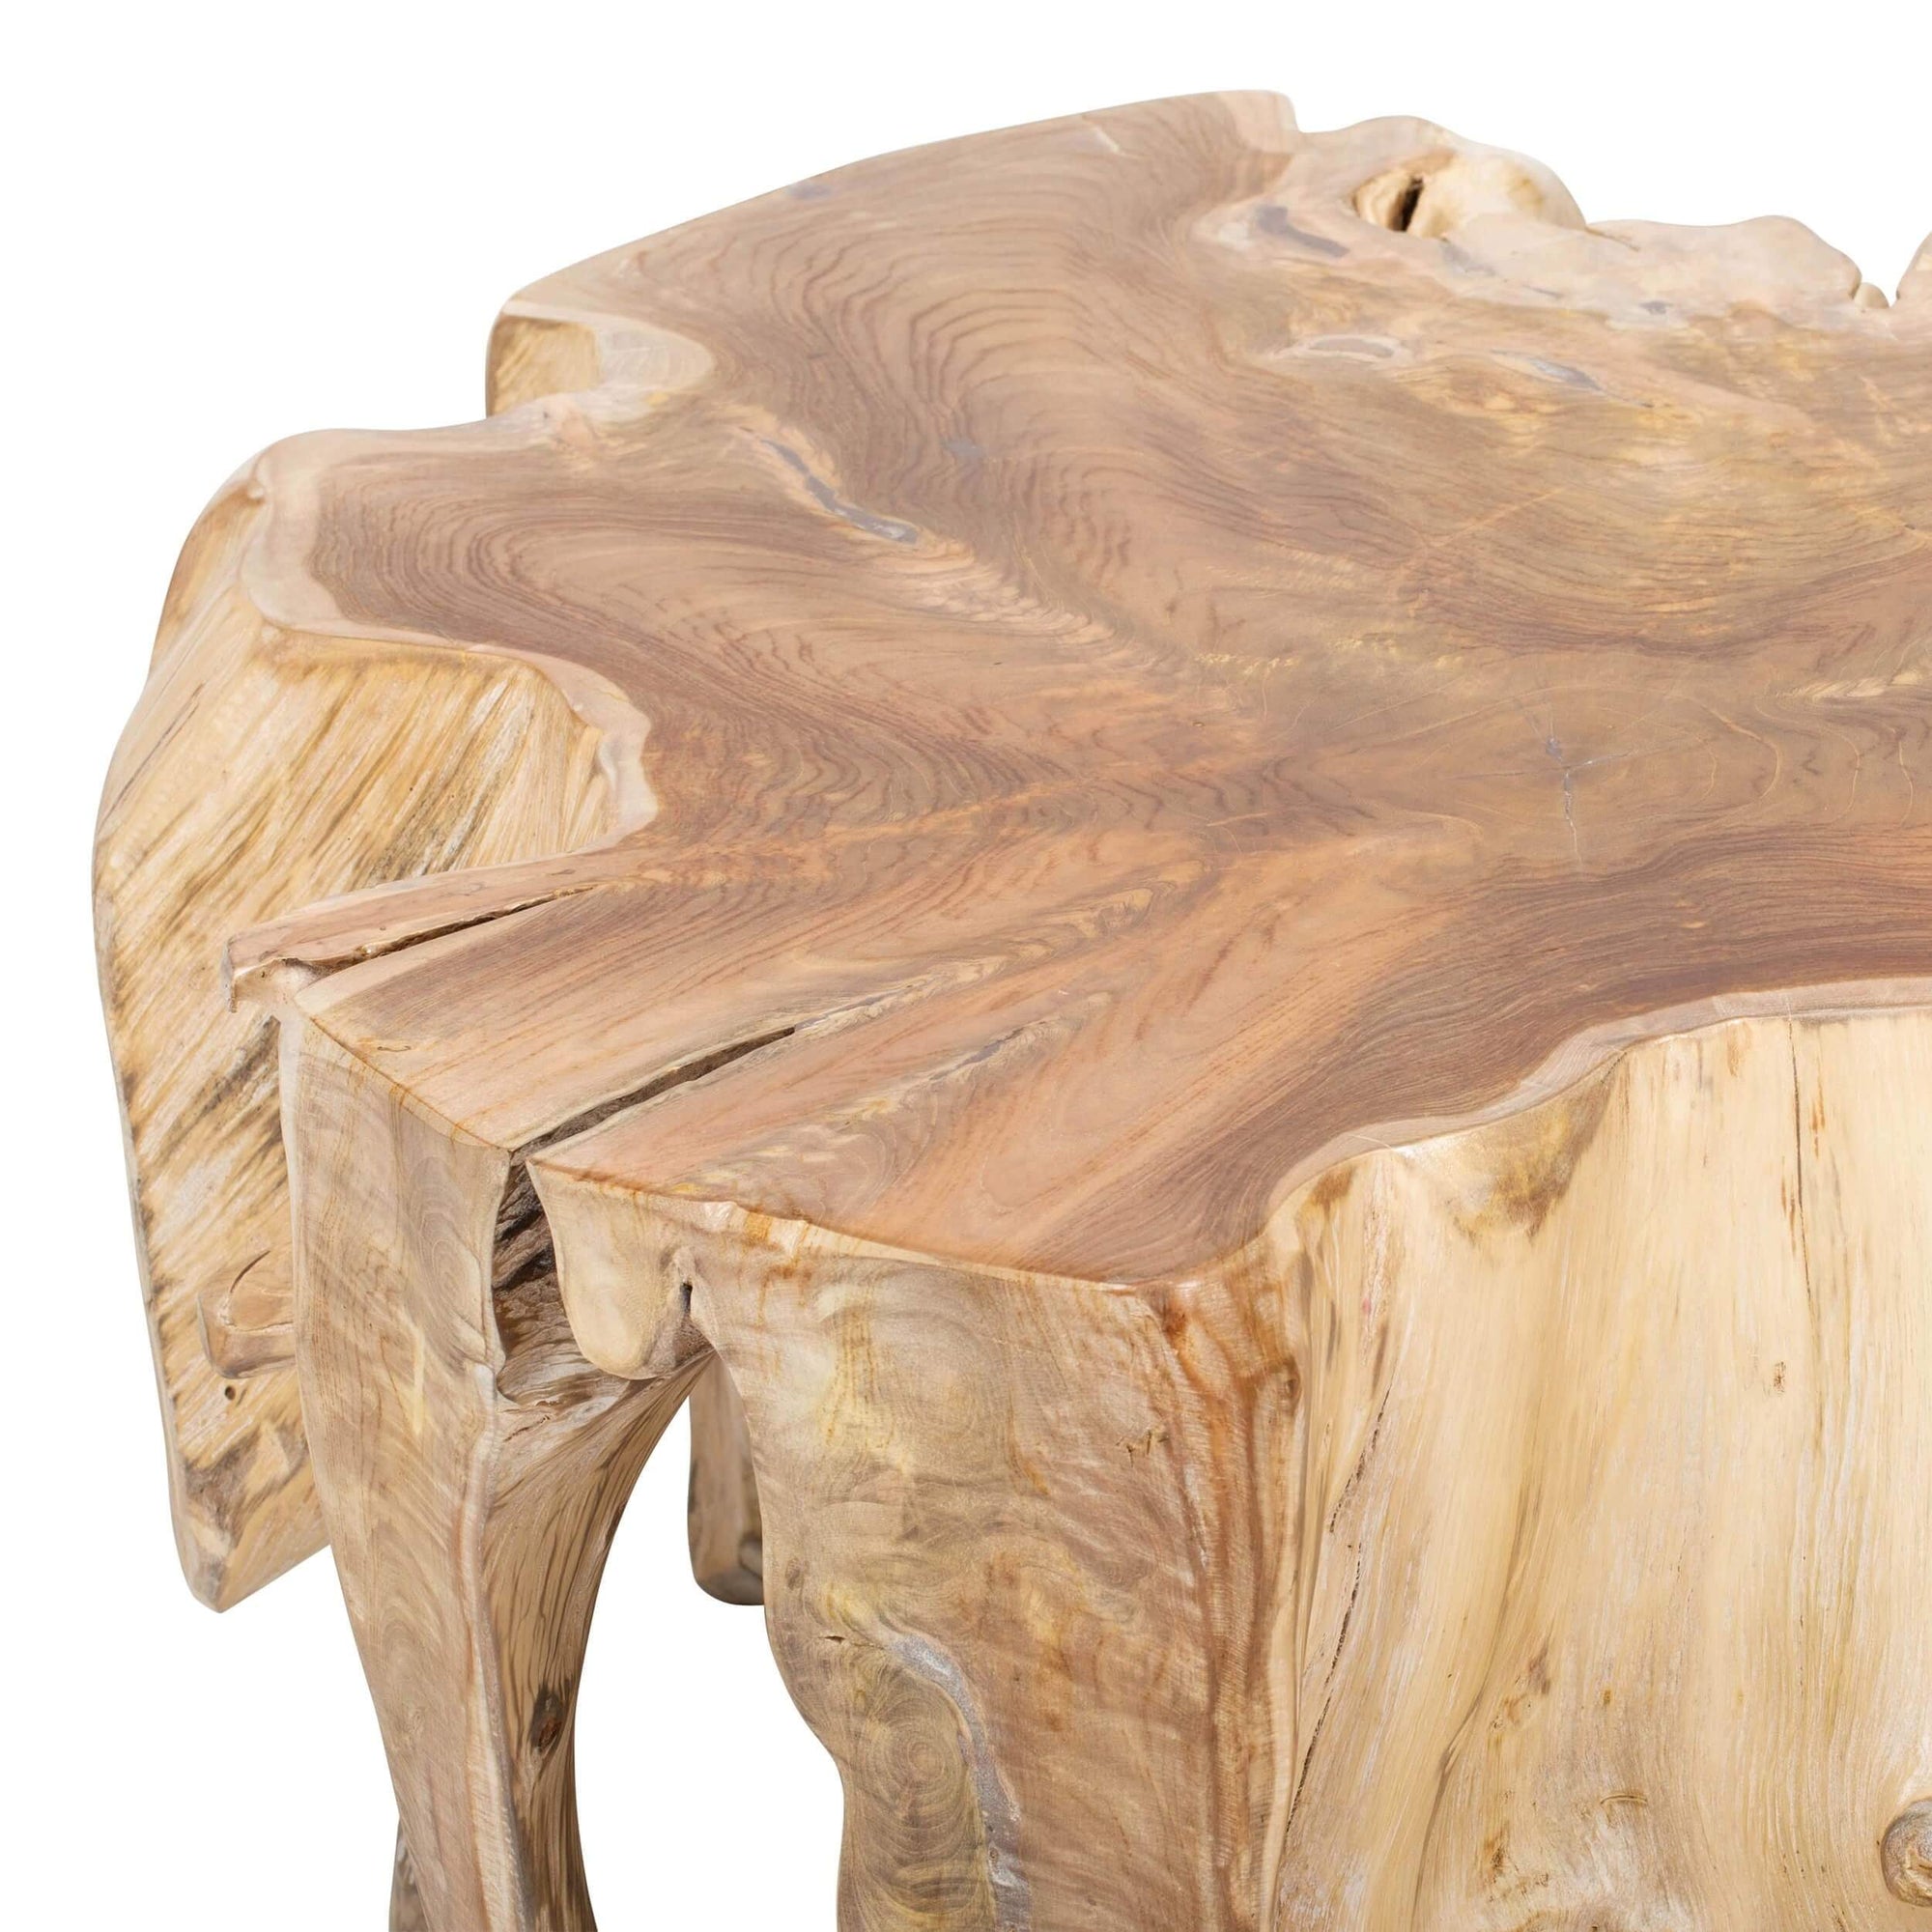 Cypress Root Coffee Table High Fashion Home